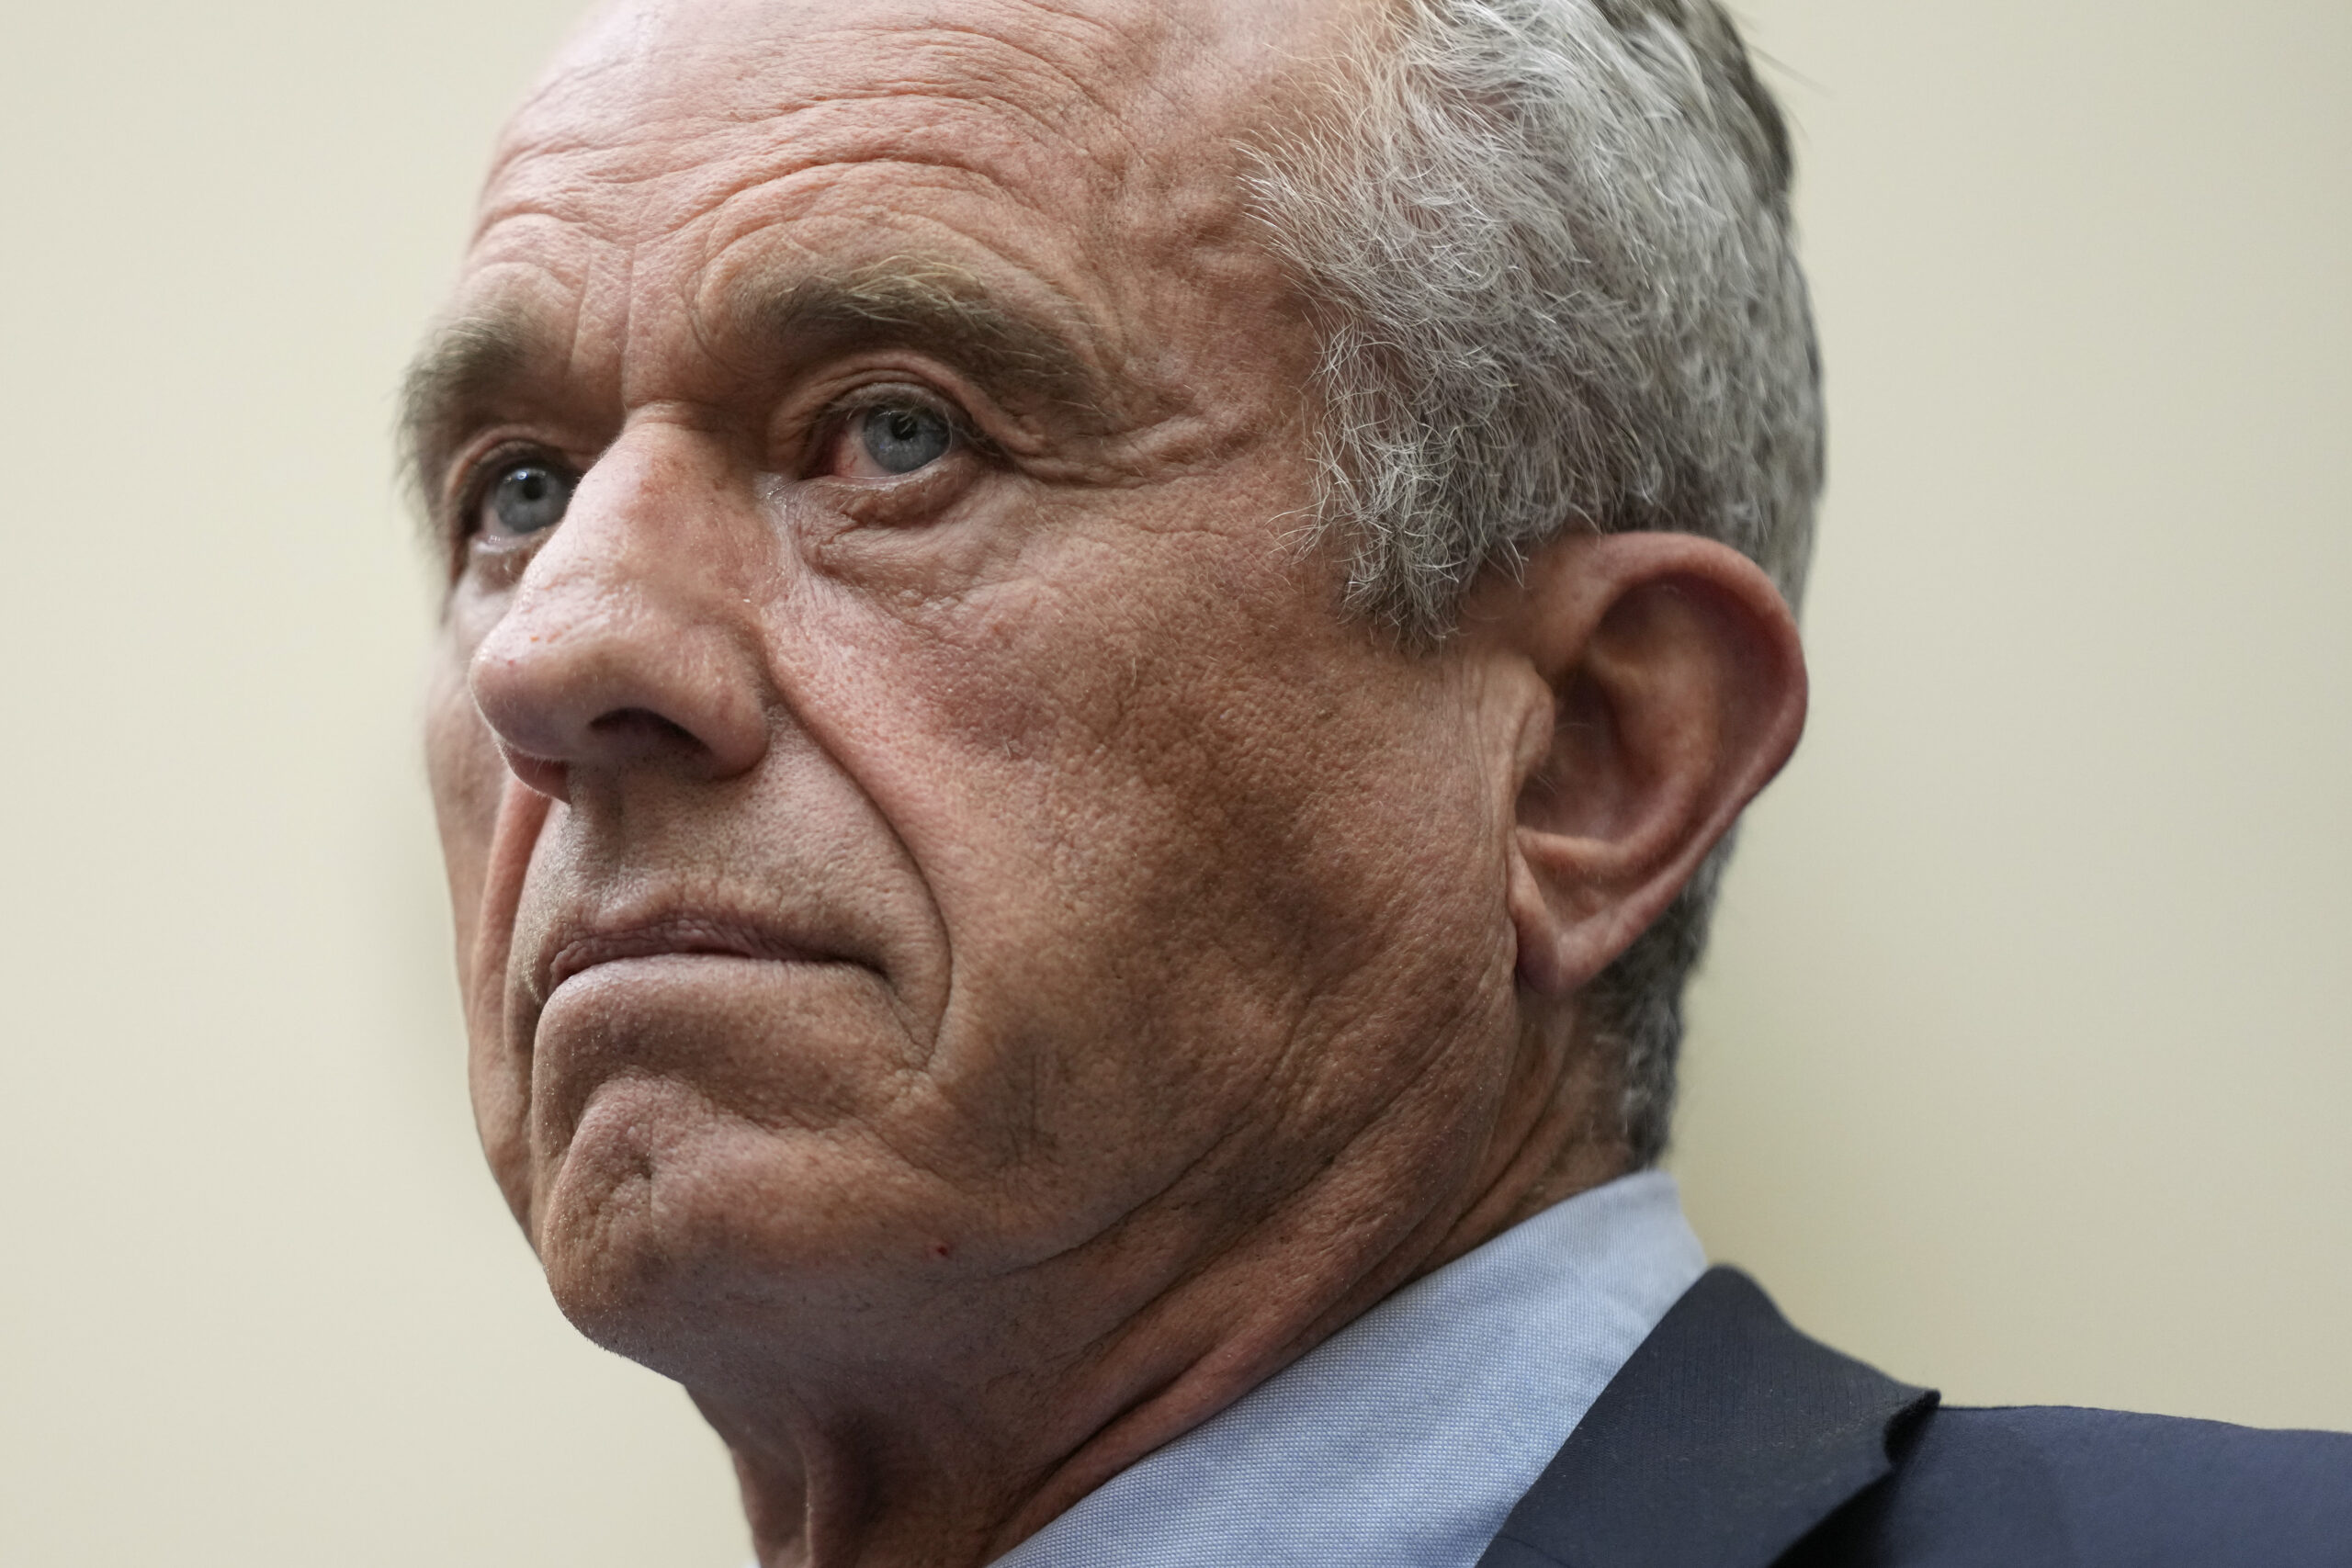 Whoa: New Poll Shows RFK Jr. Siphoning More Support From Trump Than Biden